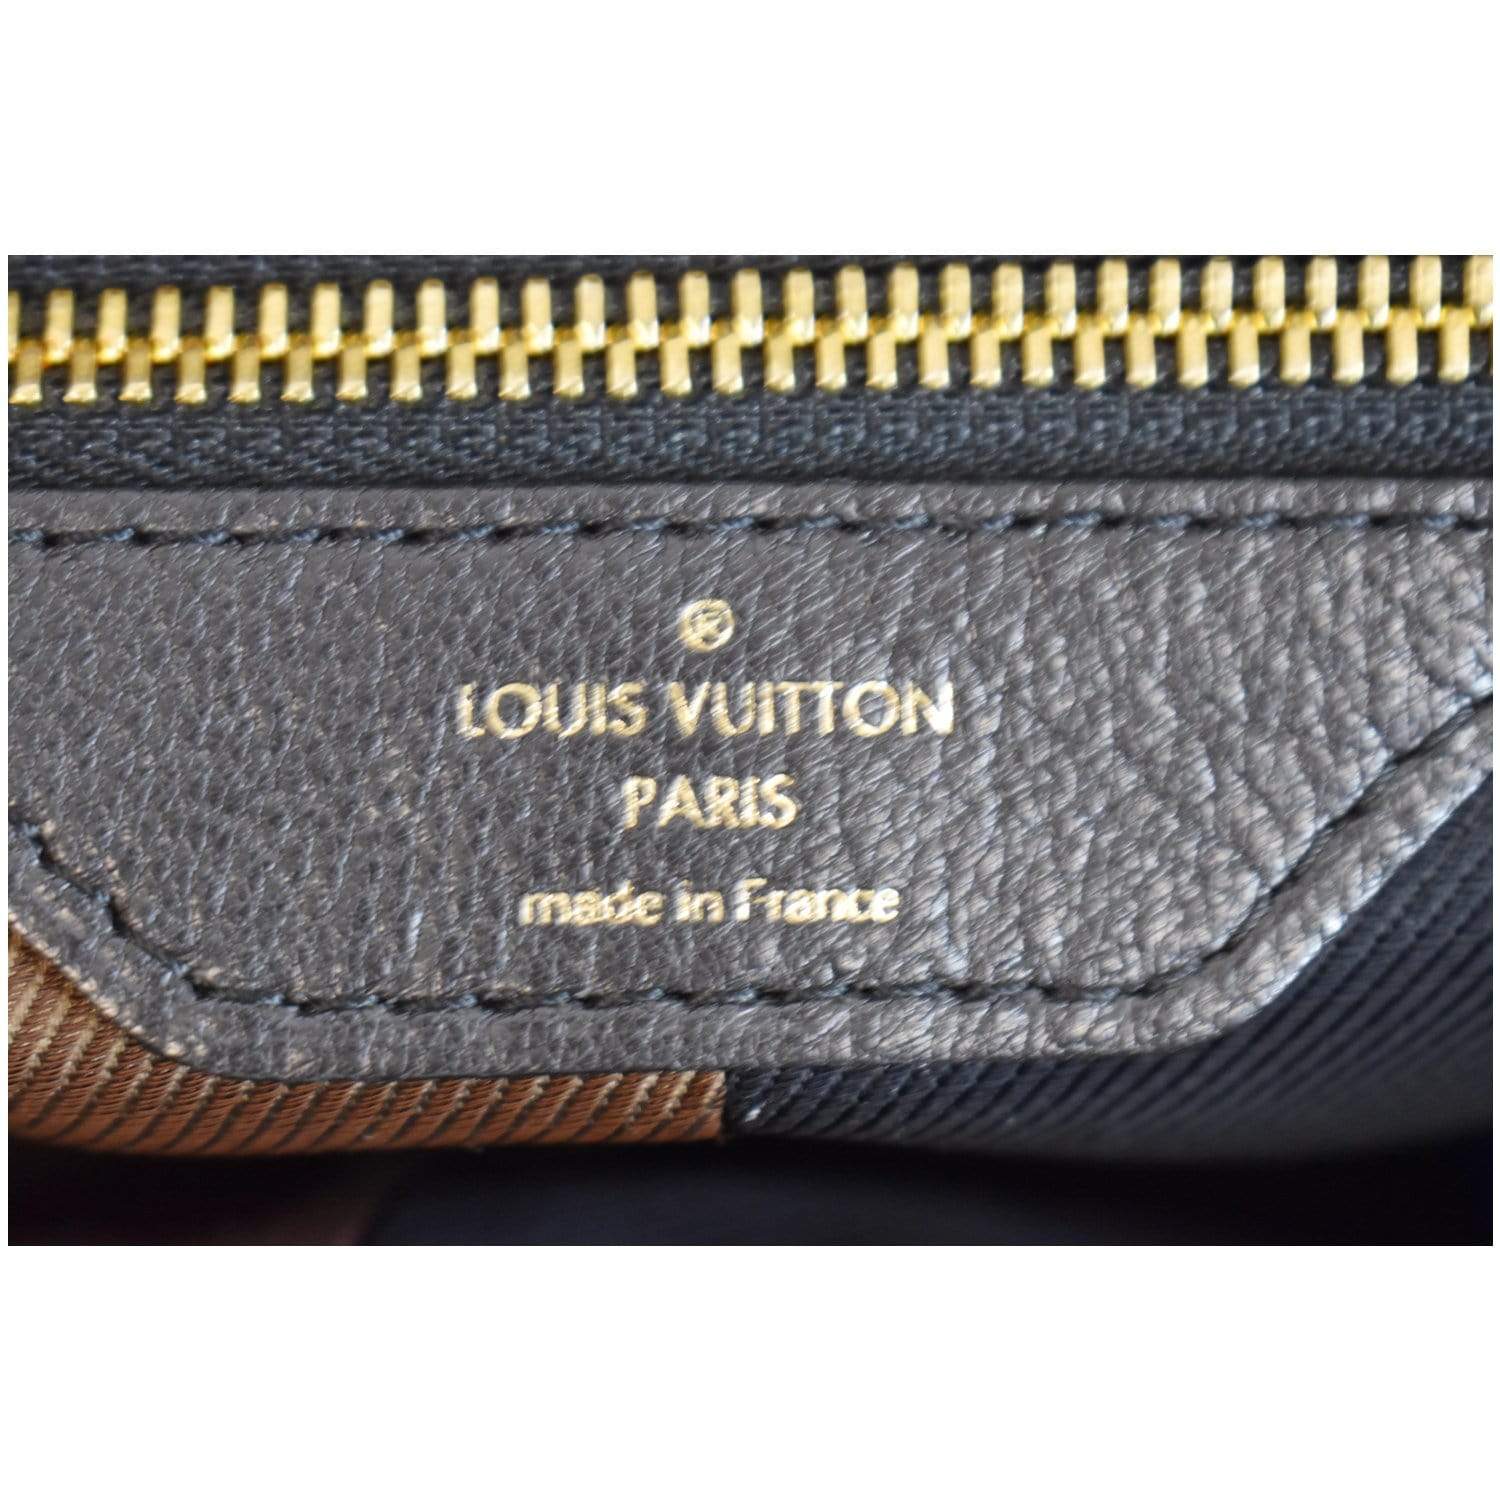 A BROWN, BLUE & BLACK MONOGRAM CANVAS & LEATHER BLOCKS TOTE BAG WITH GOLD  HARDWARE, LOUIS VUITTON, 2011